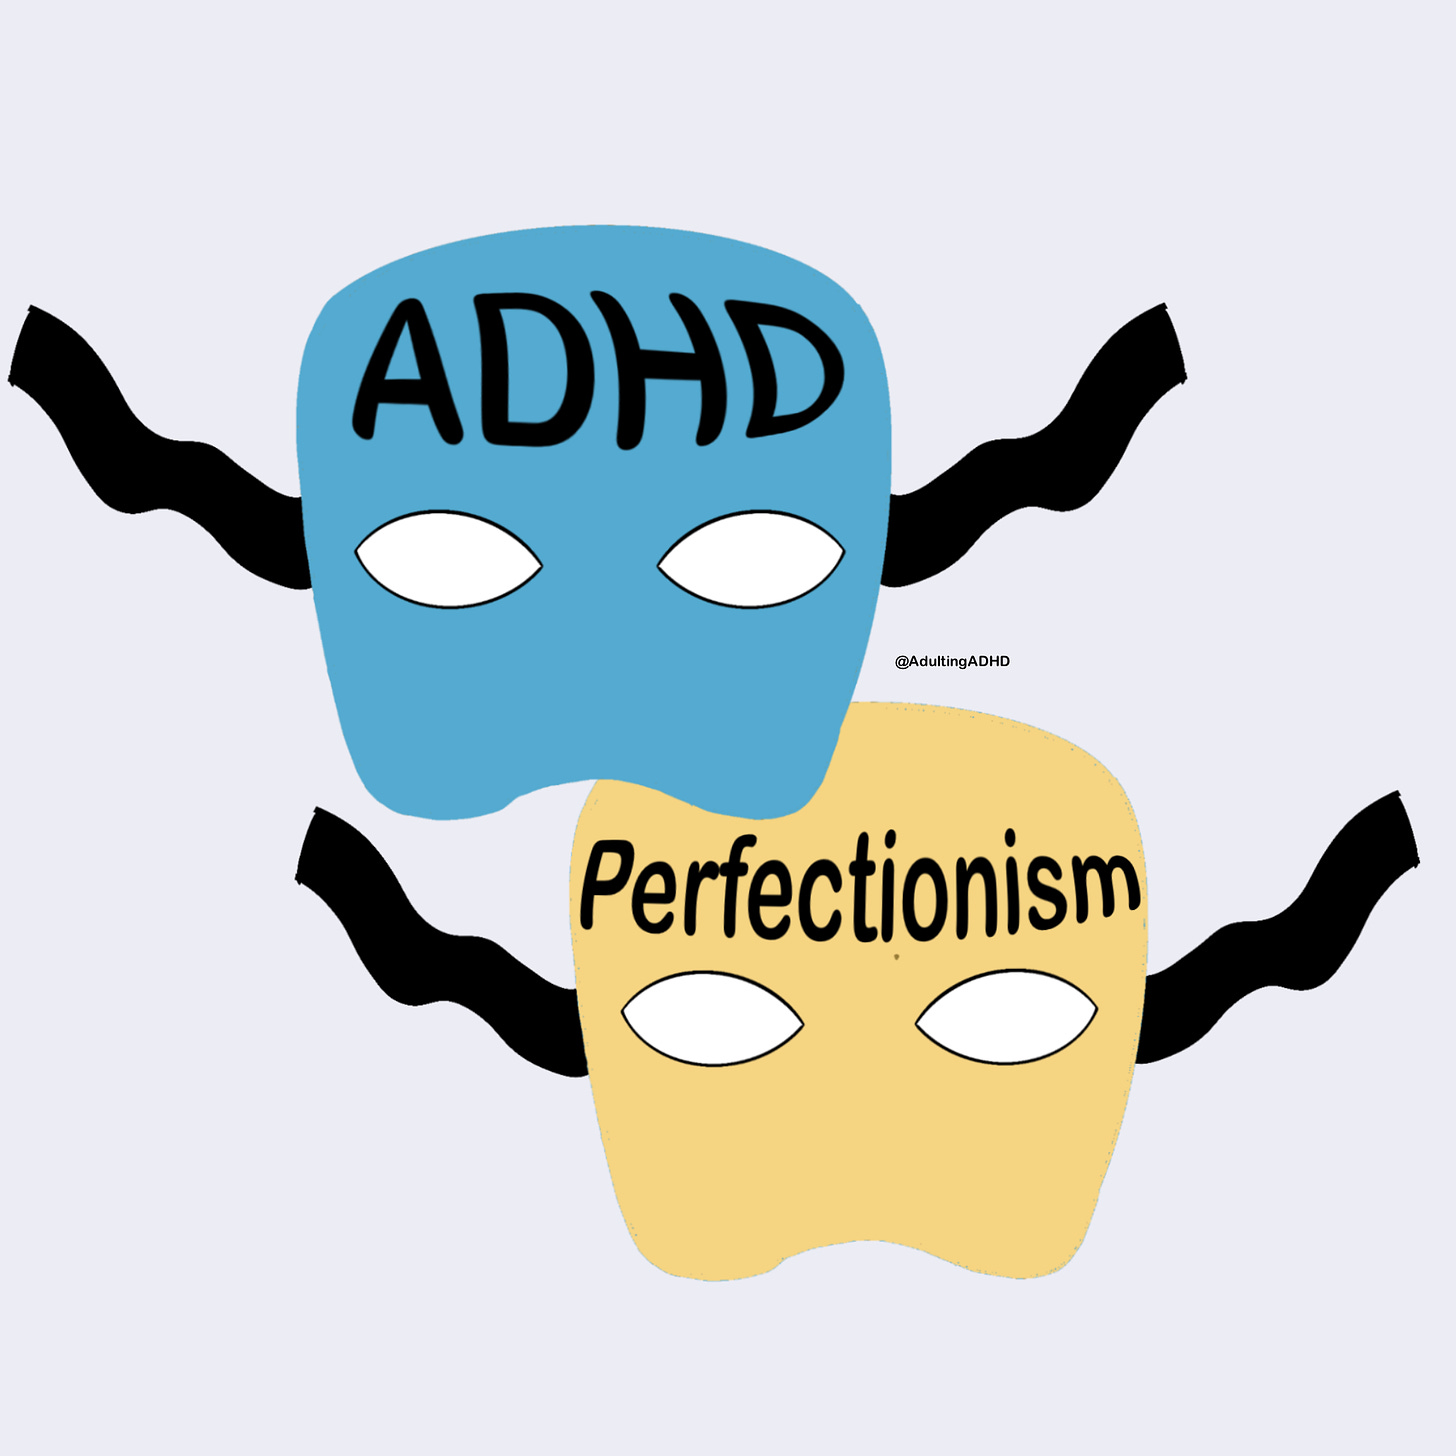 A blue costume mask with the word ‘ADHD’ written on it and a yellow costume mask with ‘perfectionism’ written on it.